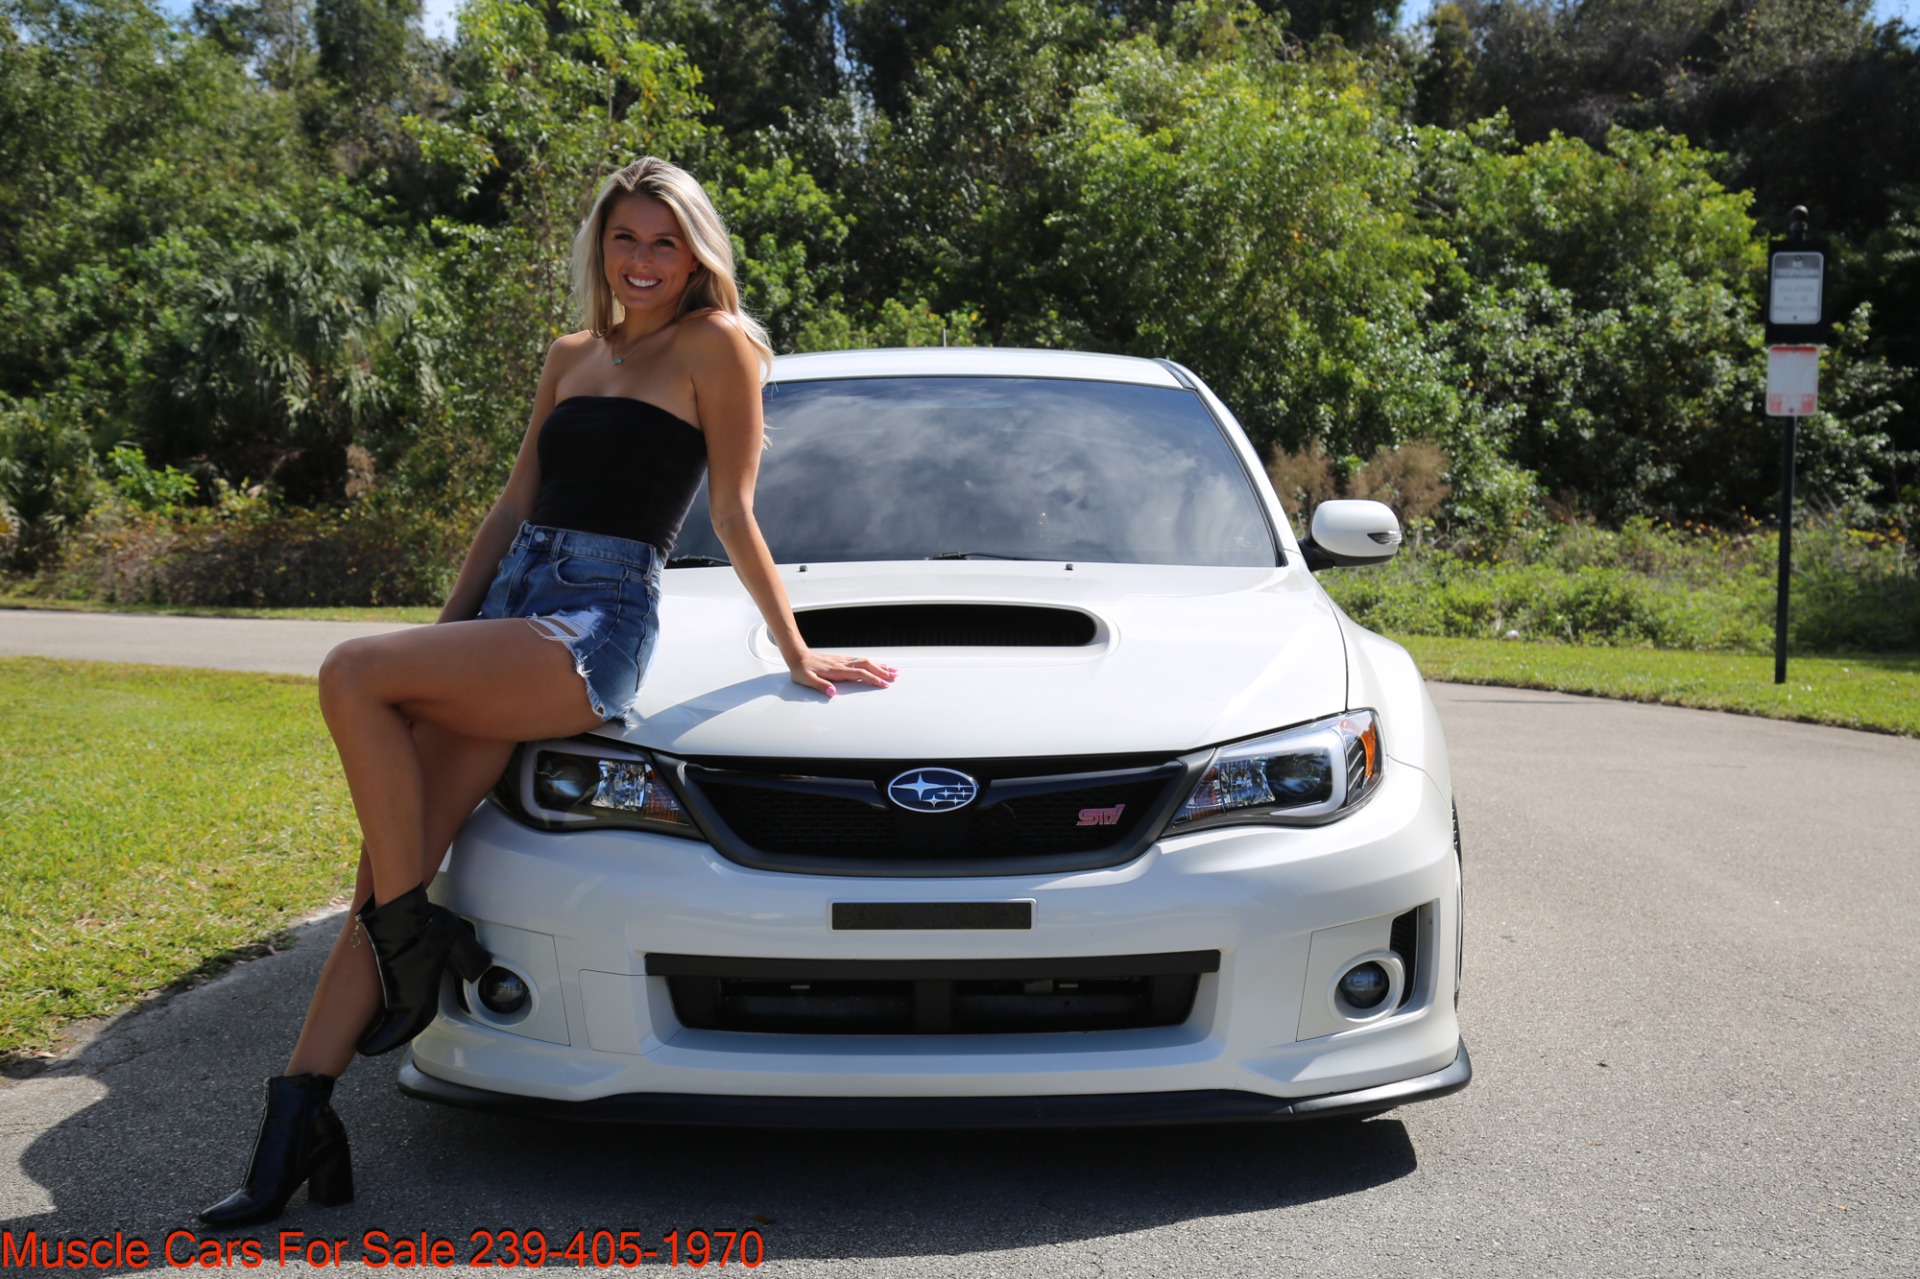 Used 2014 Subaru Impreza WRX STl Limited for sale $26,000 at Muscle Cars for Sale Inc. in Fort Myers FL 33912 6